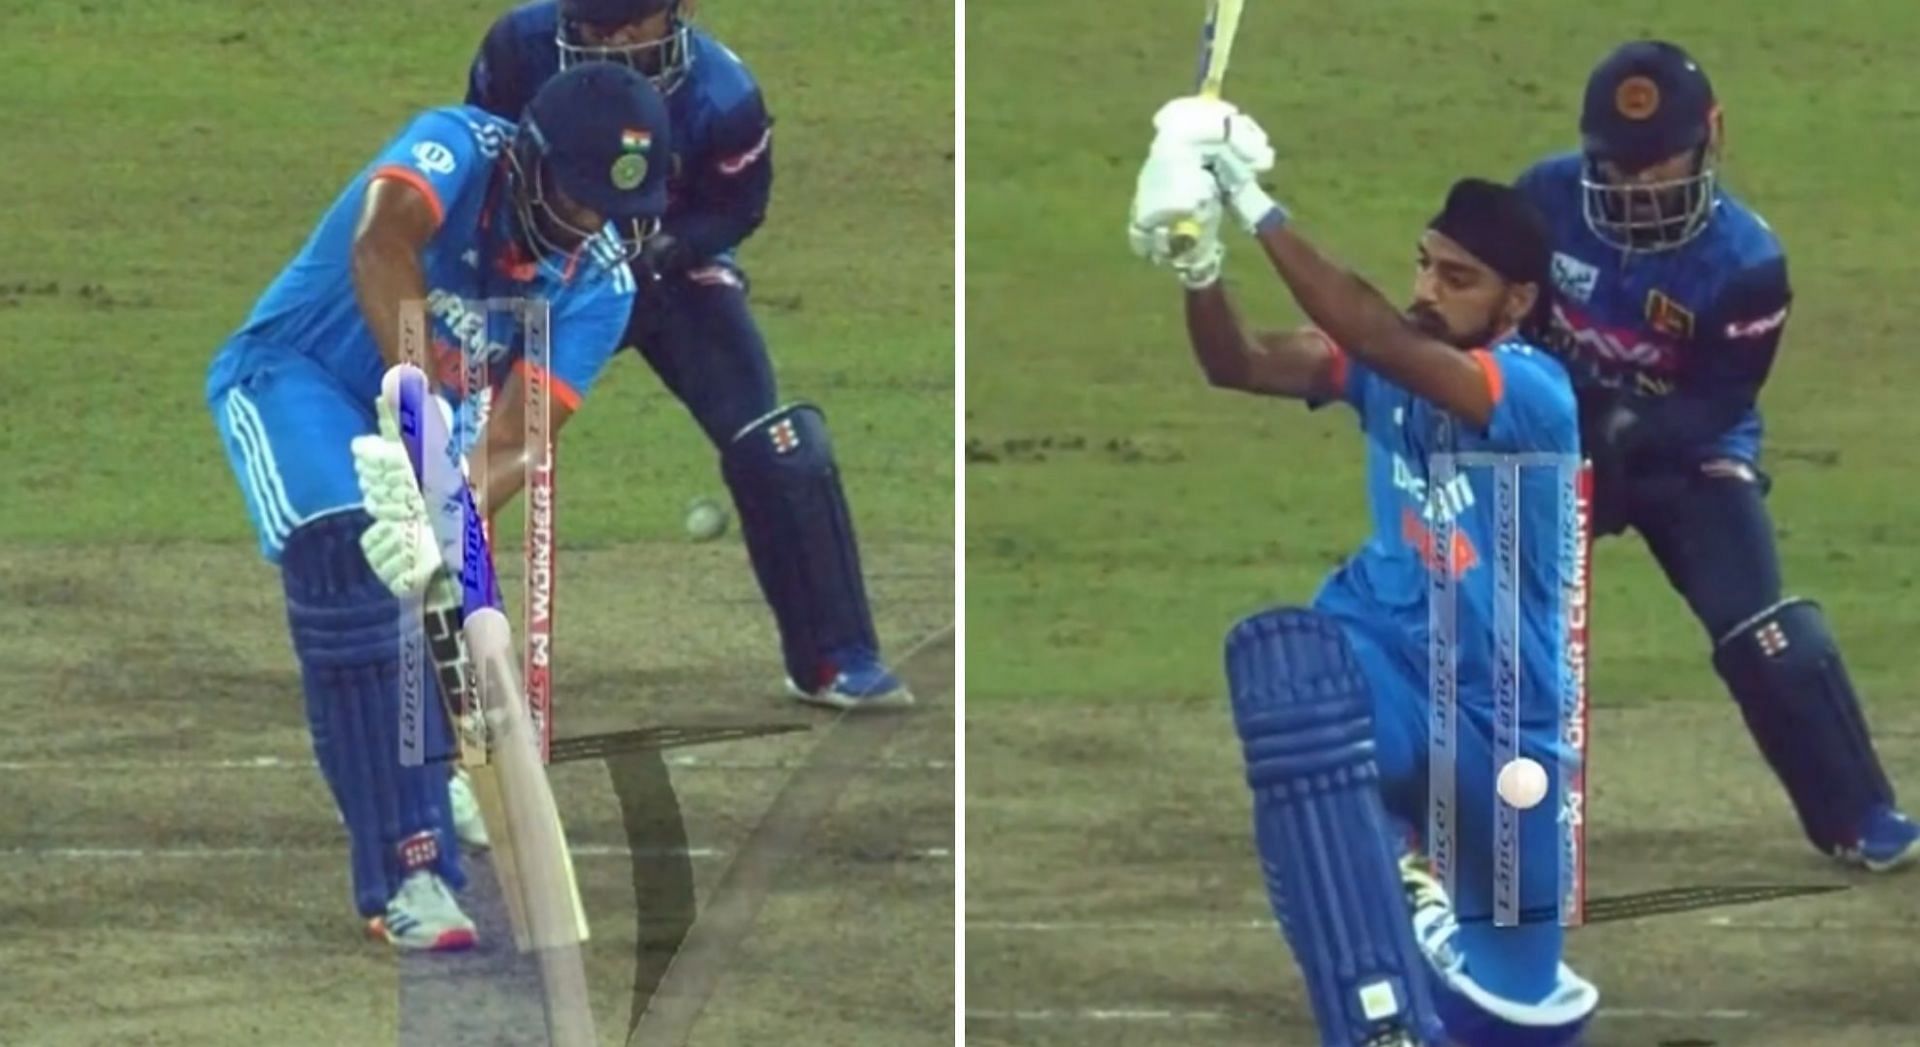 [Watch] Charith Asalanka traps Shivam Dube and Arshdeep Singh lbw off consecutive deliveries to tie IND vs SL 1st ODI